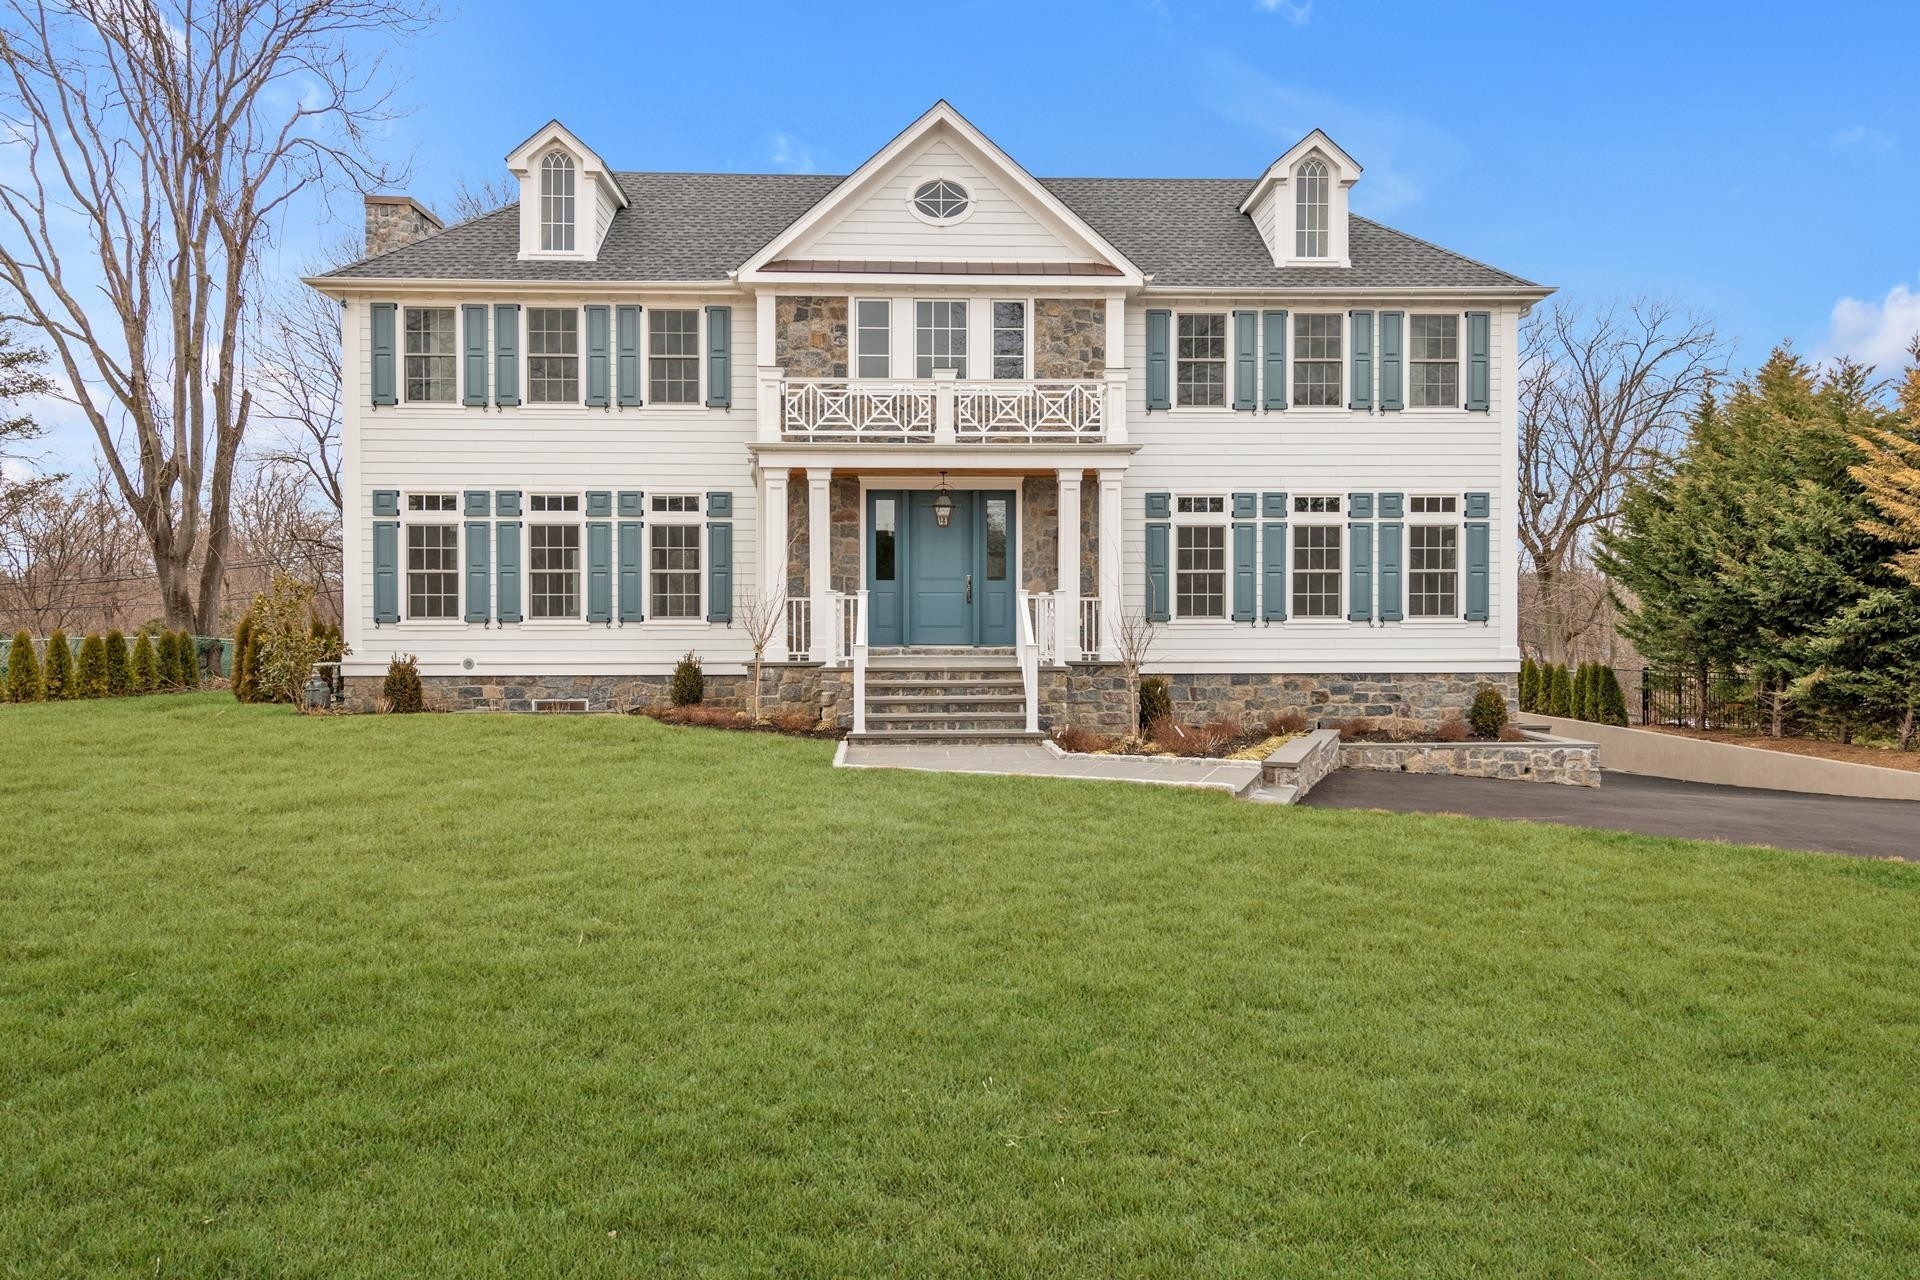 Single Family Home for Sale at Flower Hill, Manhasset, NY 11030